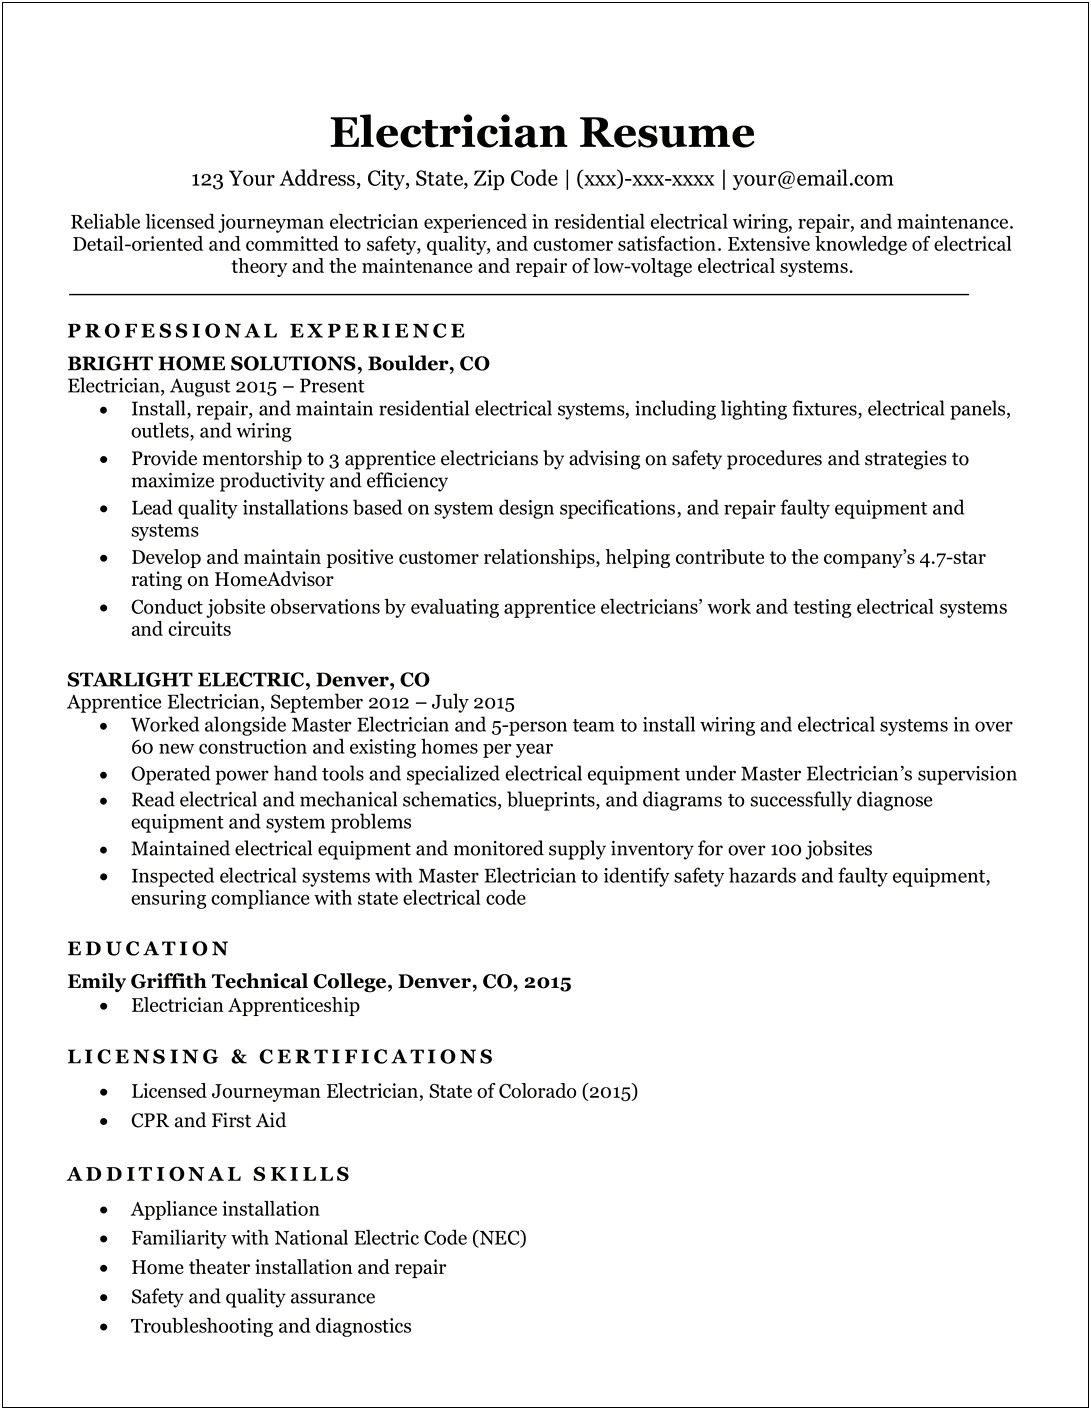 Maintenance Skills And Qualifications For Resume